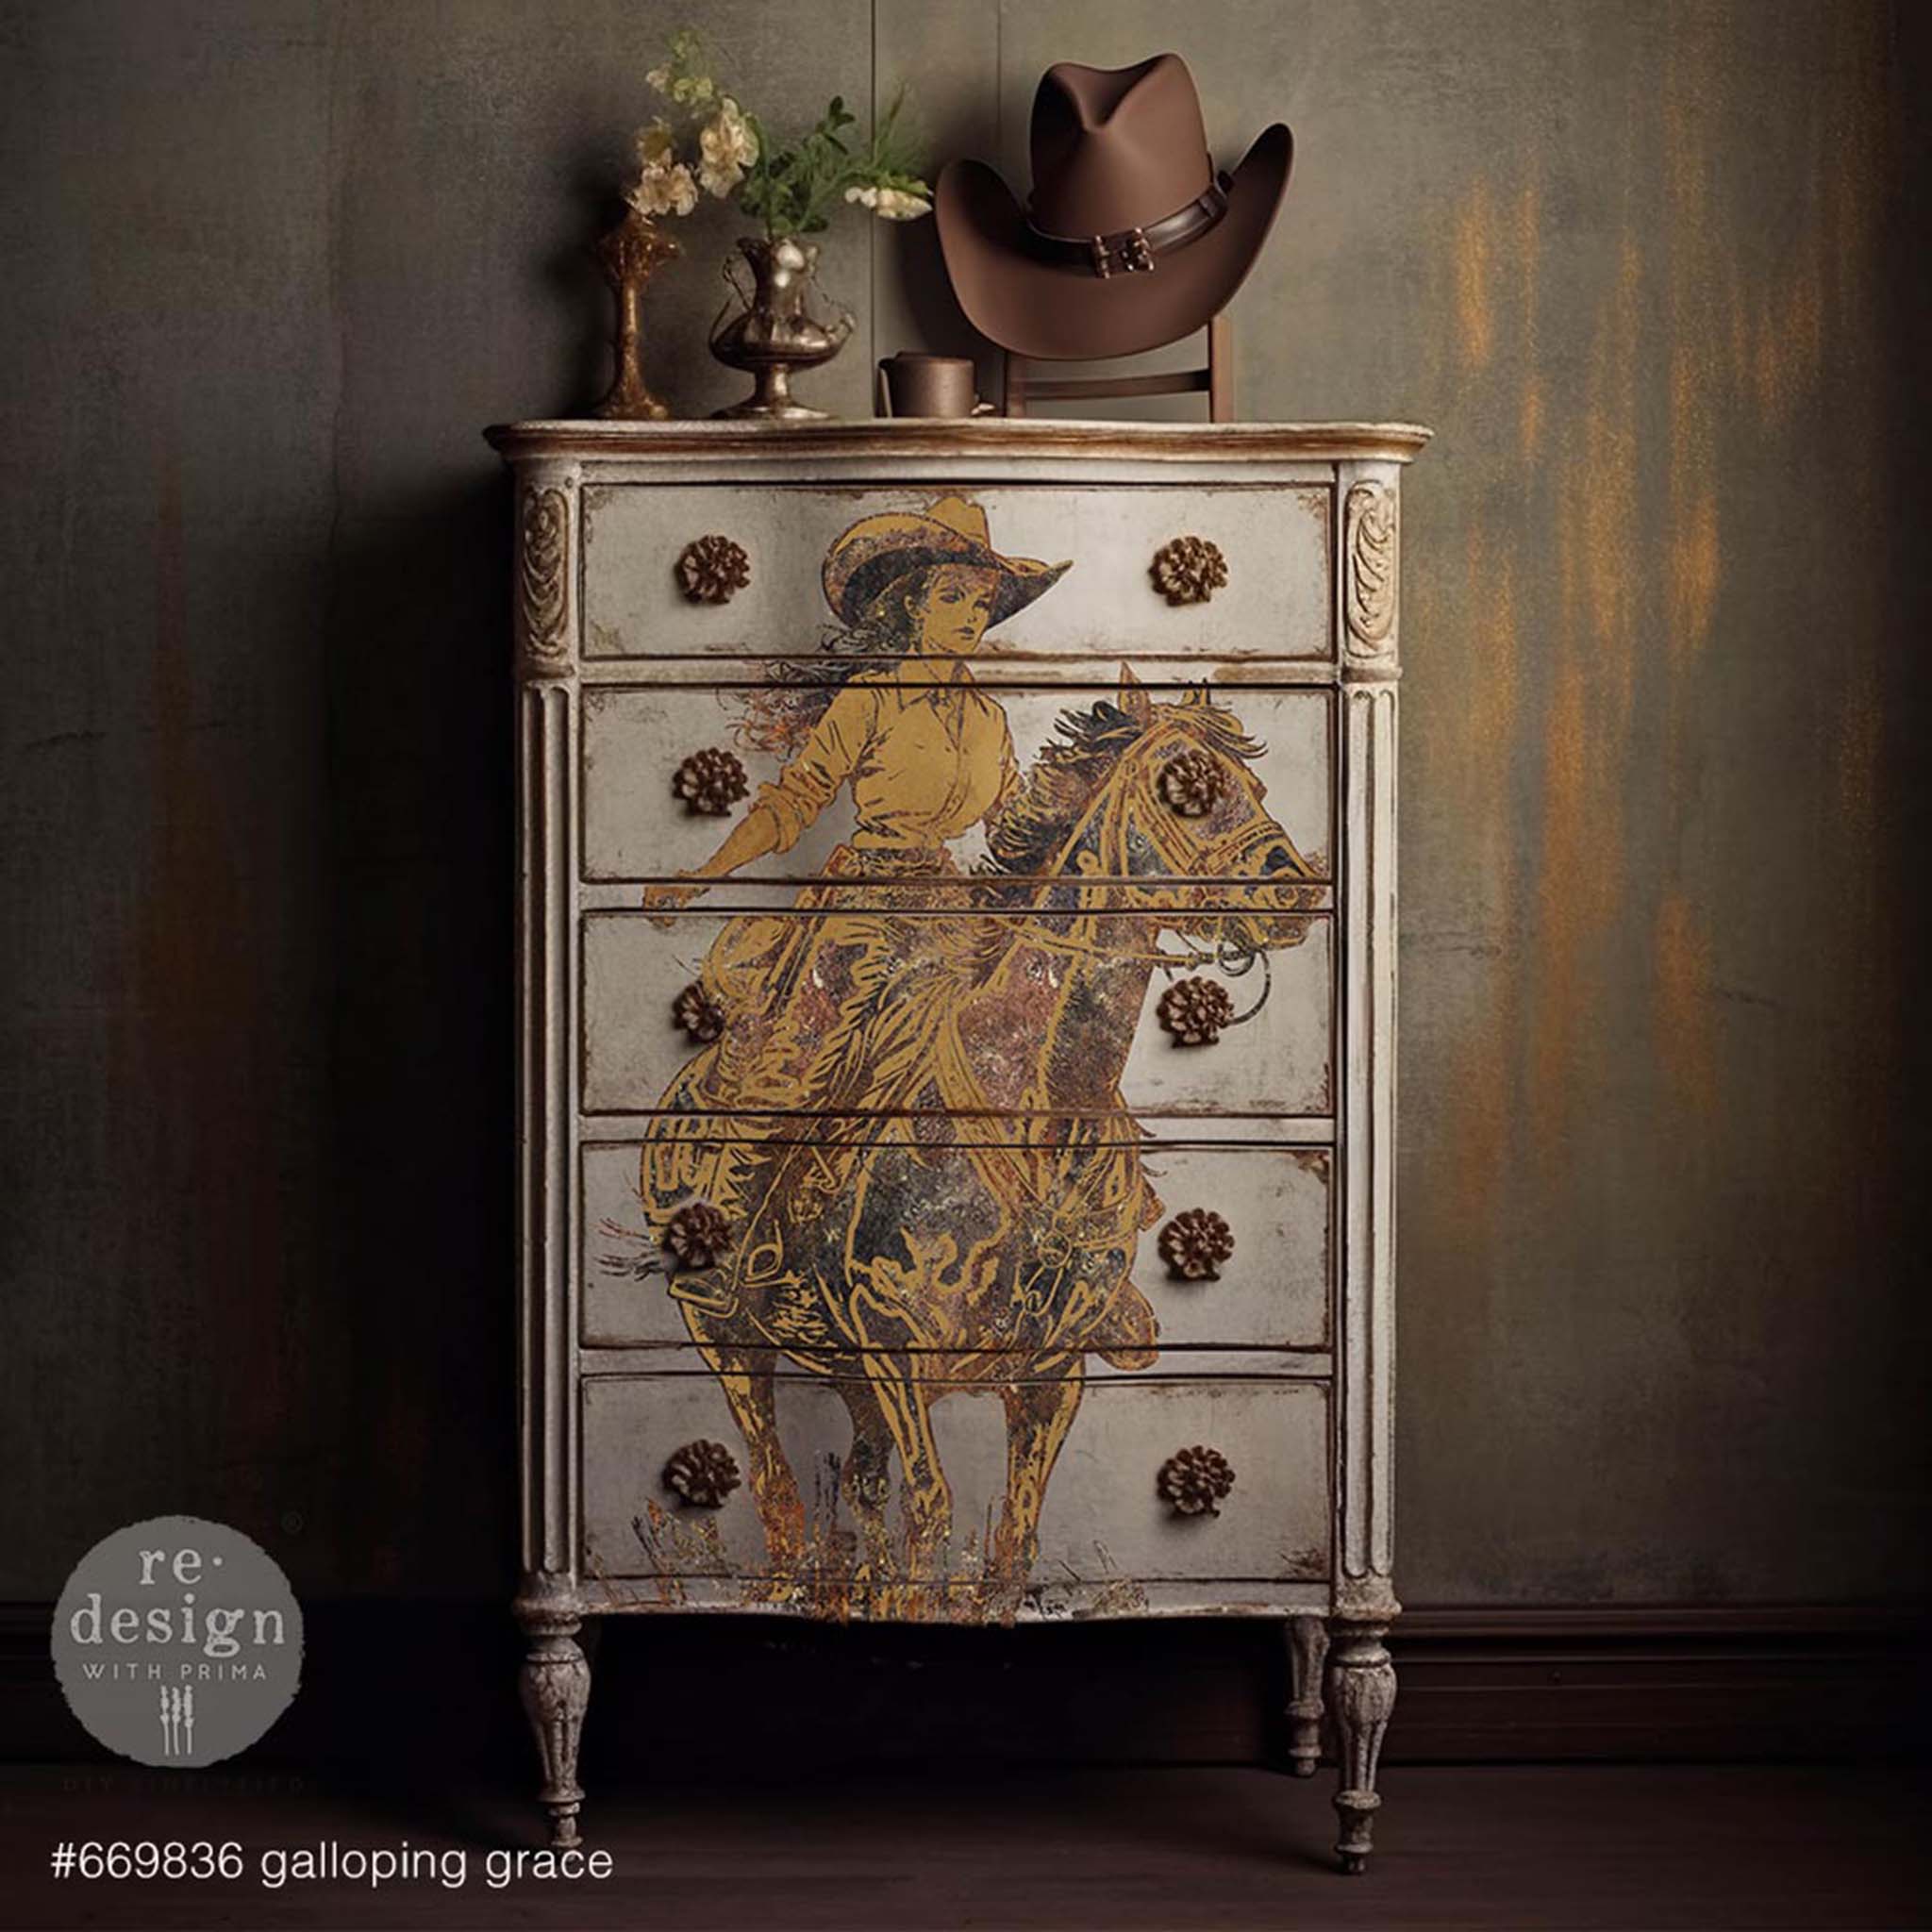 A vintage 5-drawer chest dresser is painted gray and features ReDesign with Prima's Galloping Grace transfer down the center of its drawers.